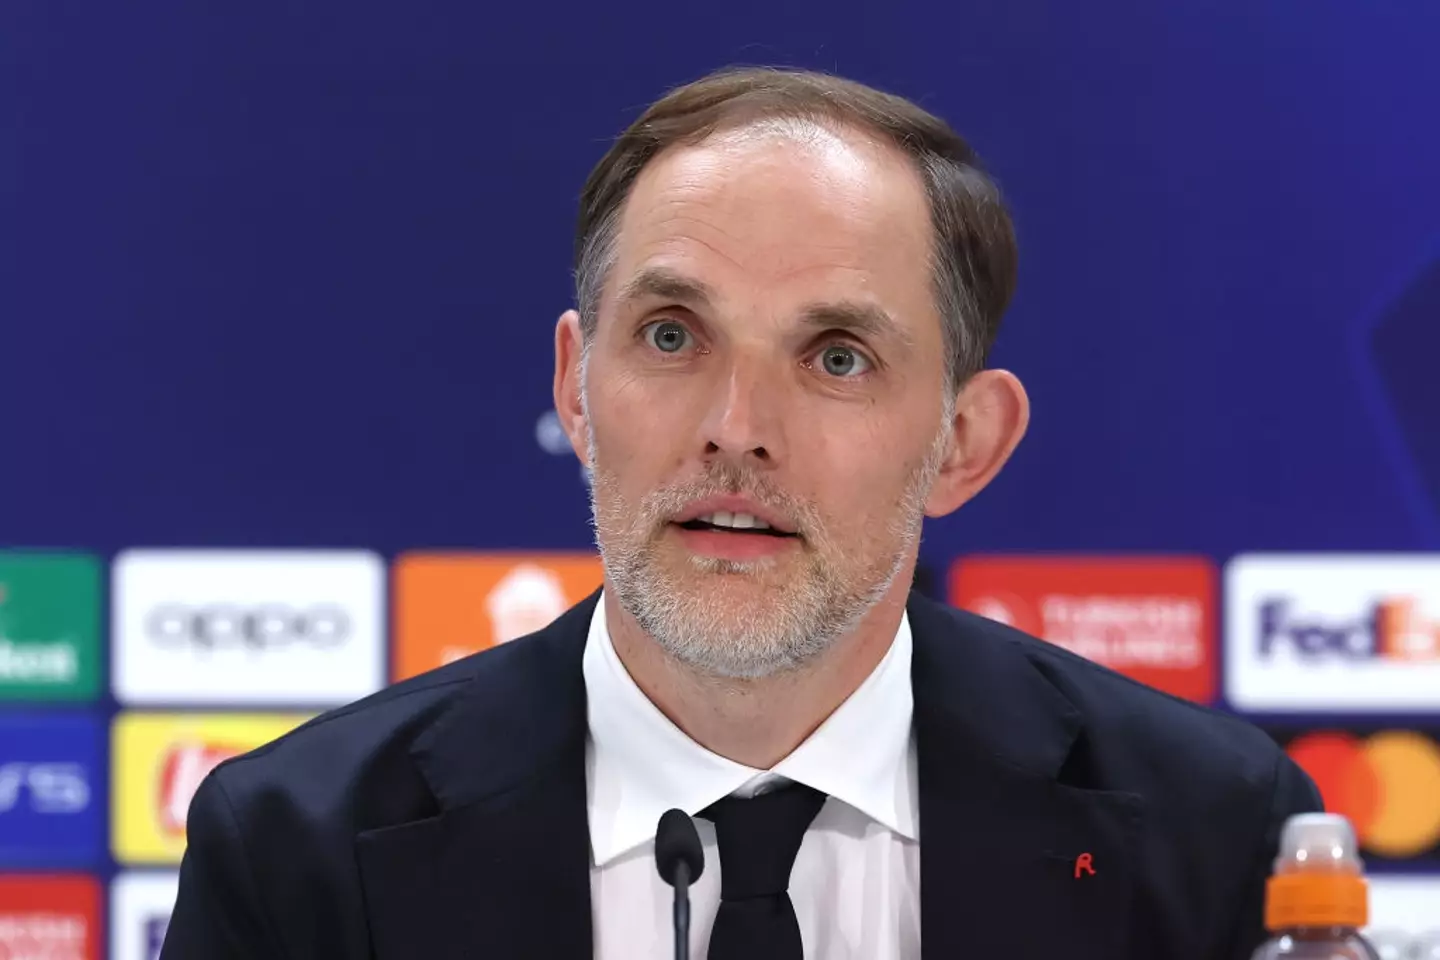 Tuchel is set to leave Bayern at the end of the season (Image: Getty)